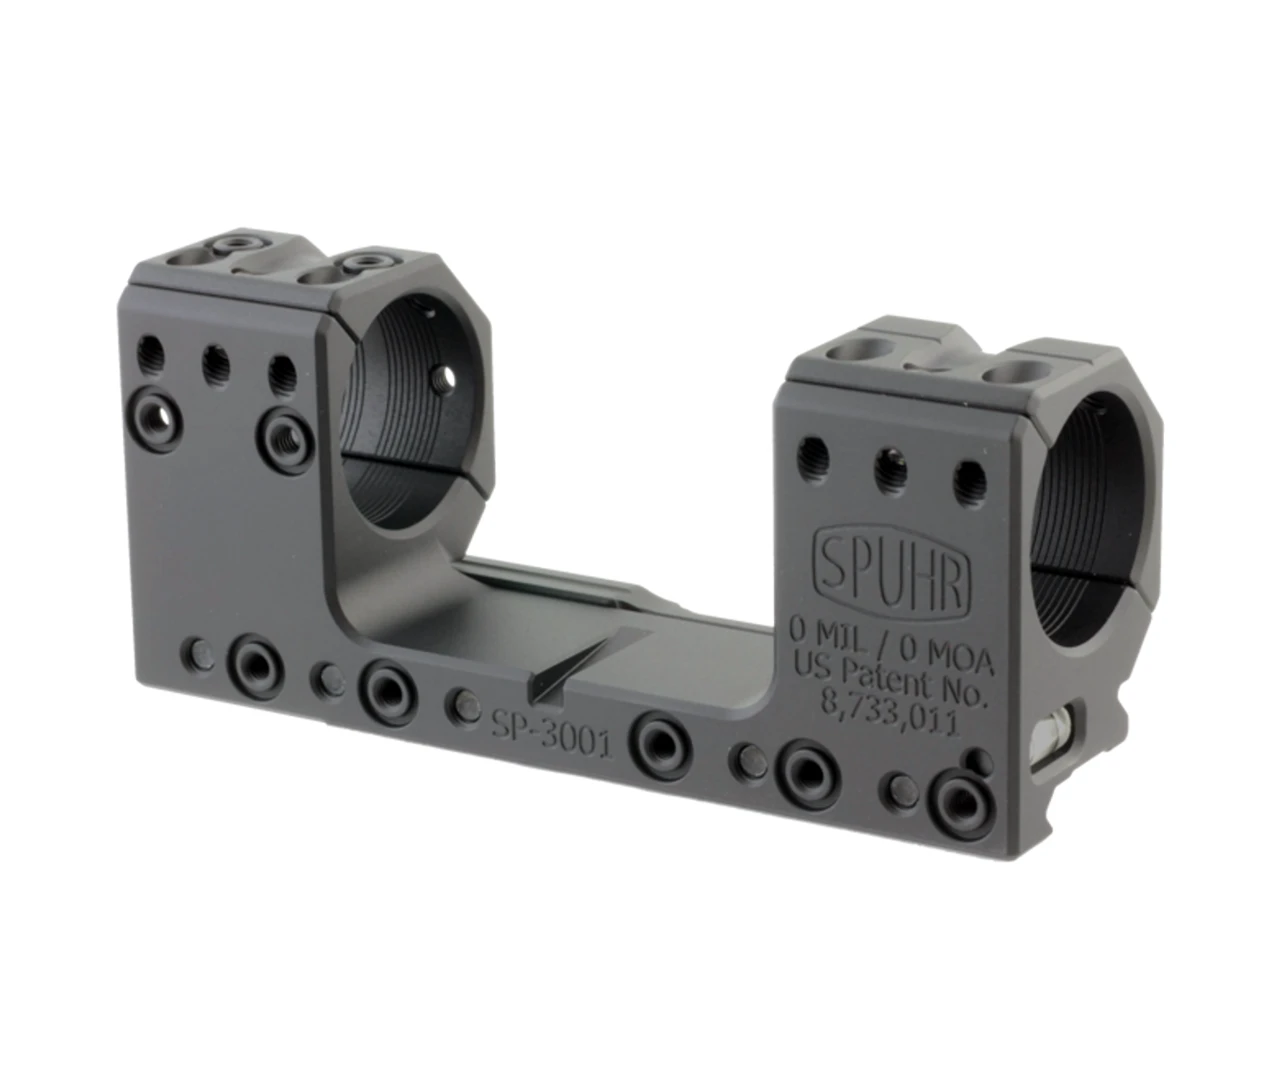 SPUHR SPUHR ISMS ONE PIECE SCOPE MOUNT, 30MM DIA, 30MM HEIGHT, 0 MIL